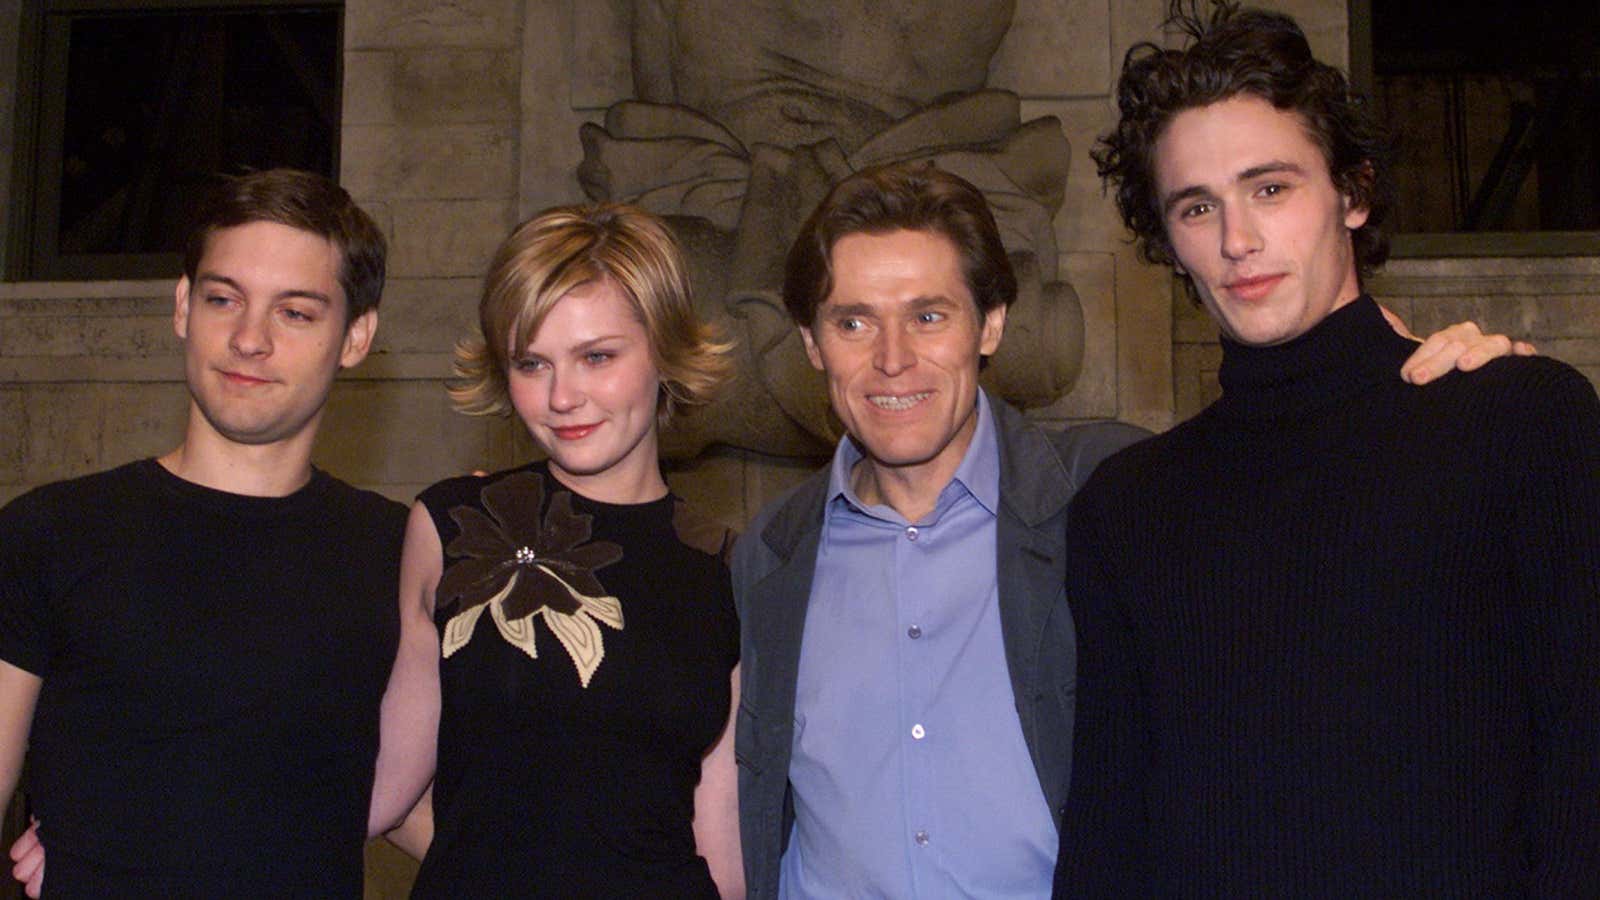 The fresh-faced cast of “Spider-man,” 2002’s biggest hit.